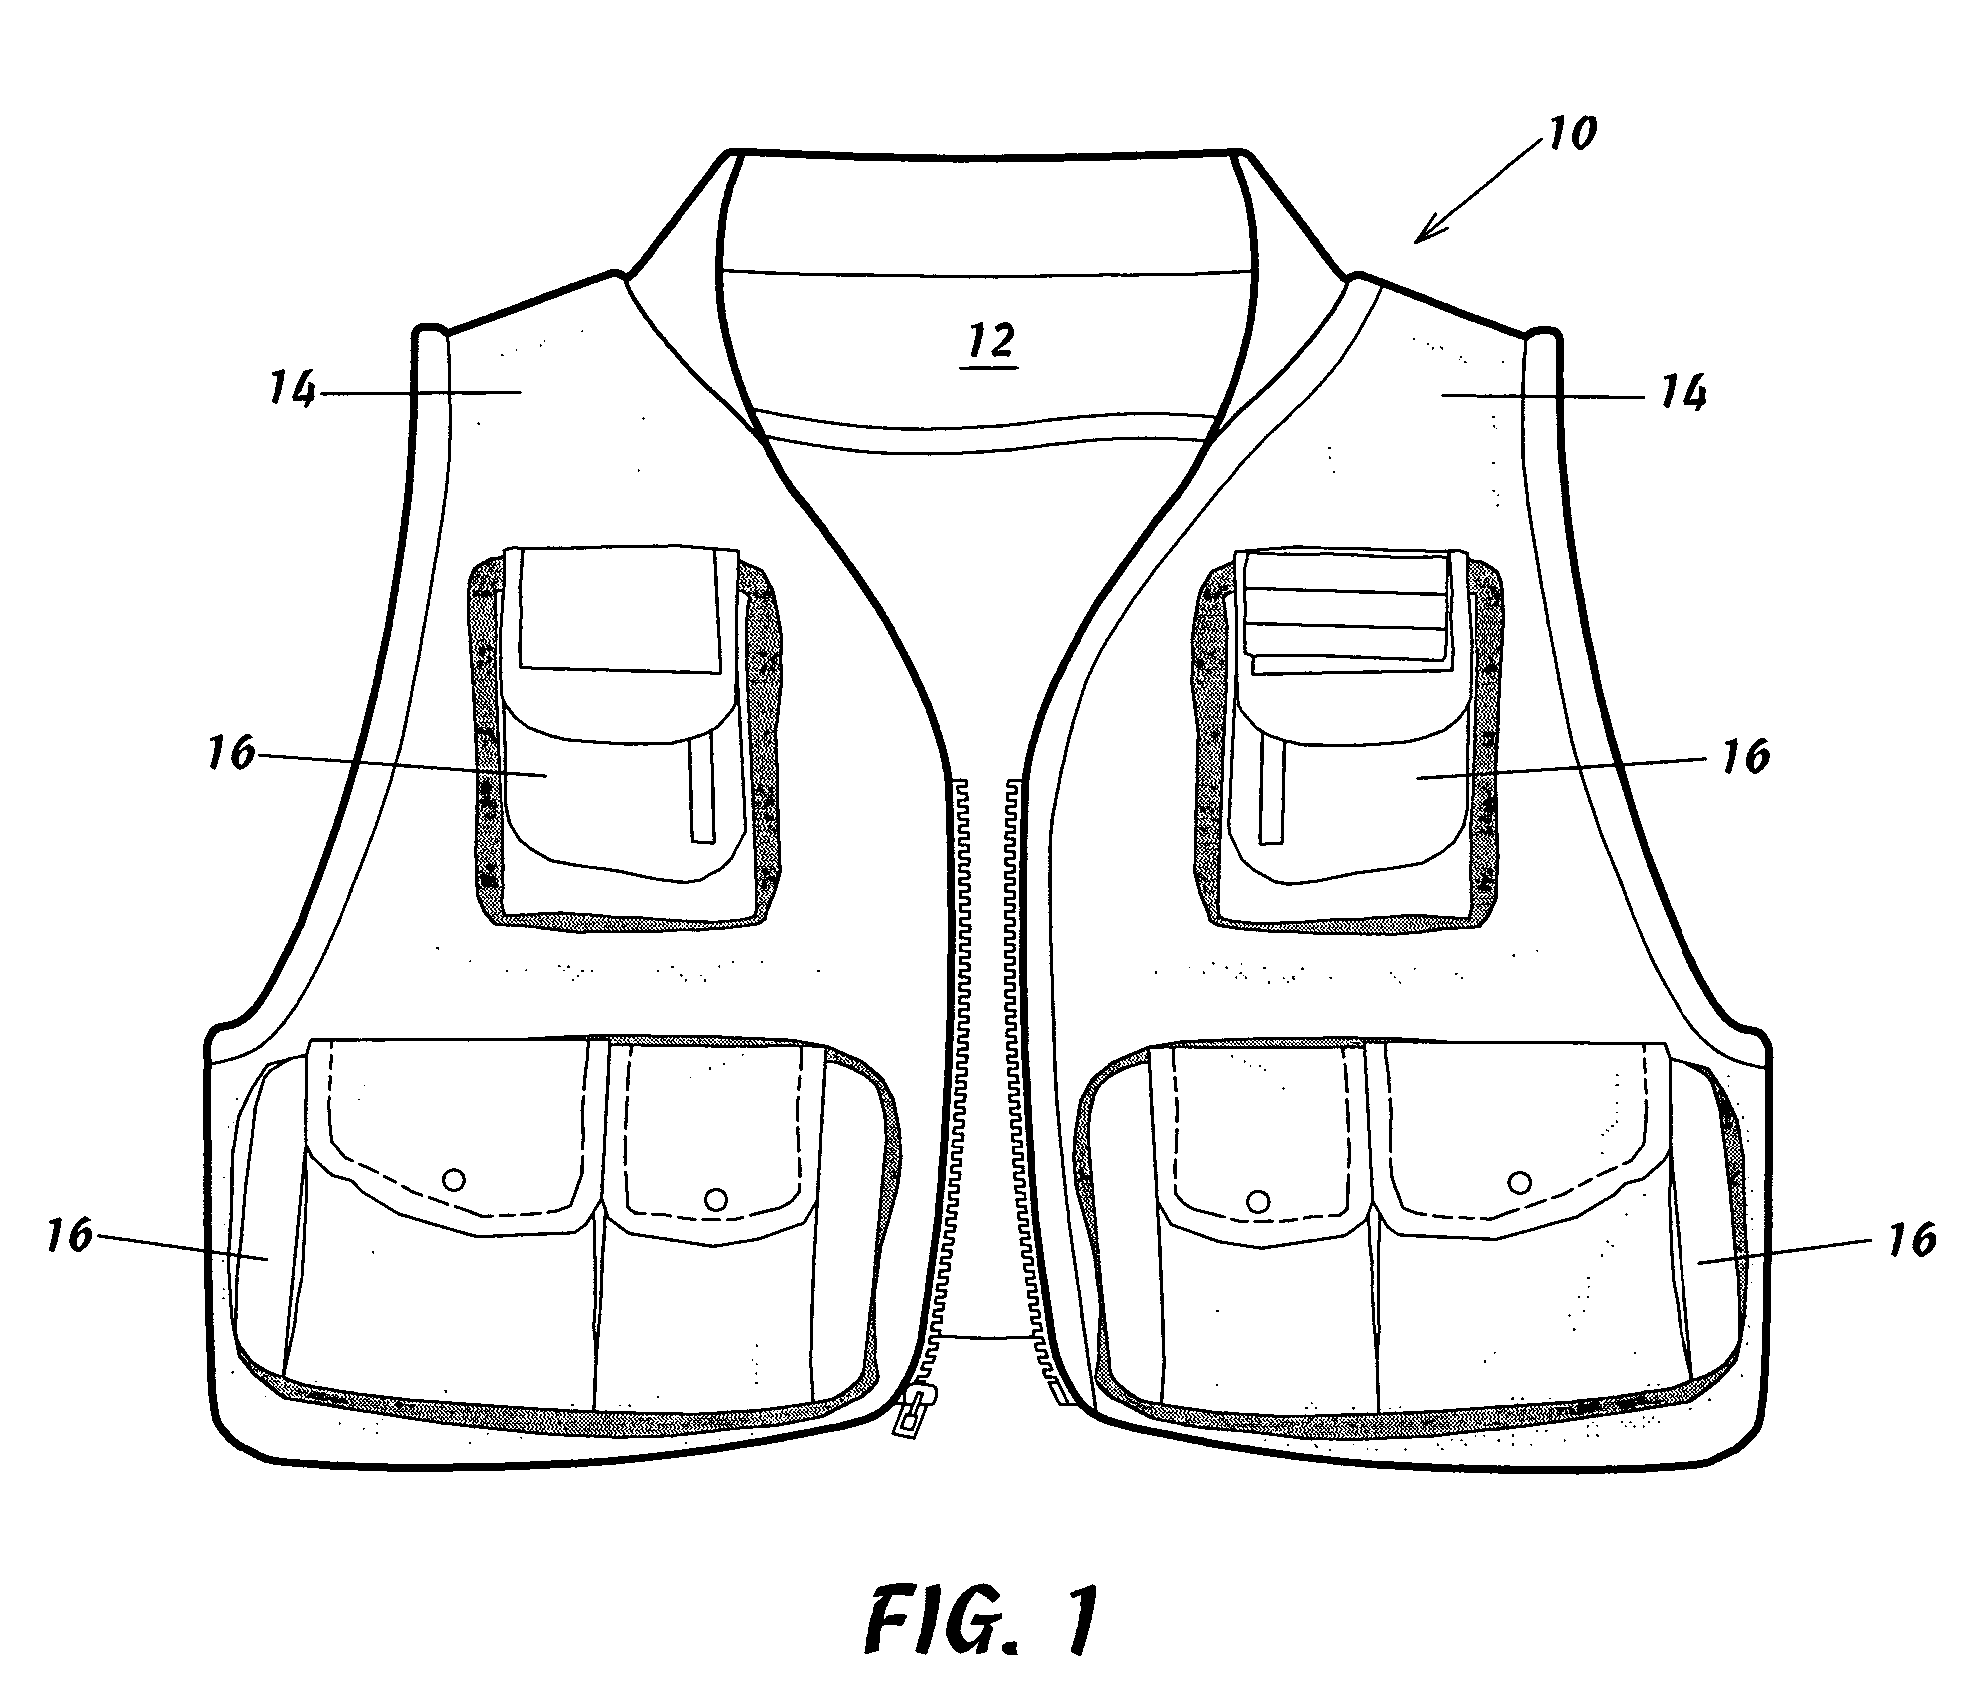 Garment with molded pockets for containment of fly fishing accessories and method of manufacturing same